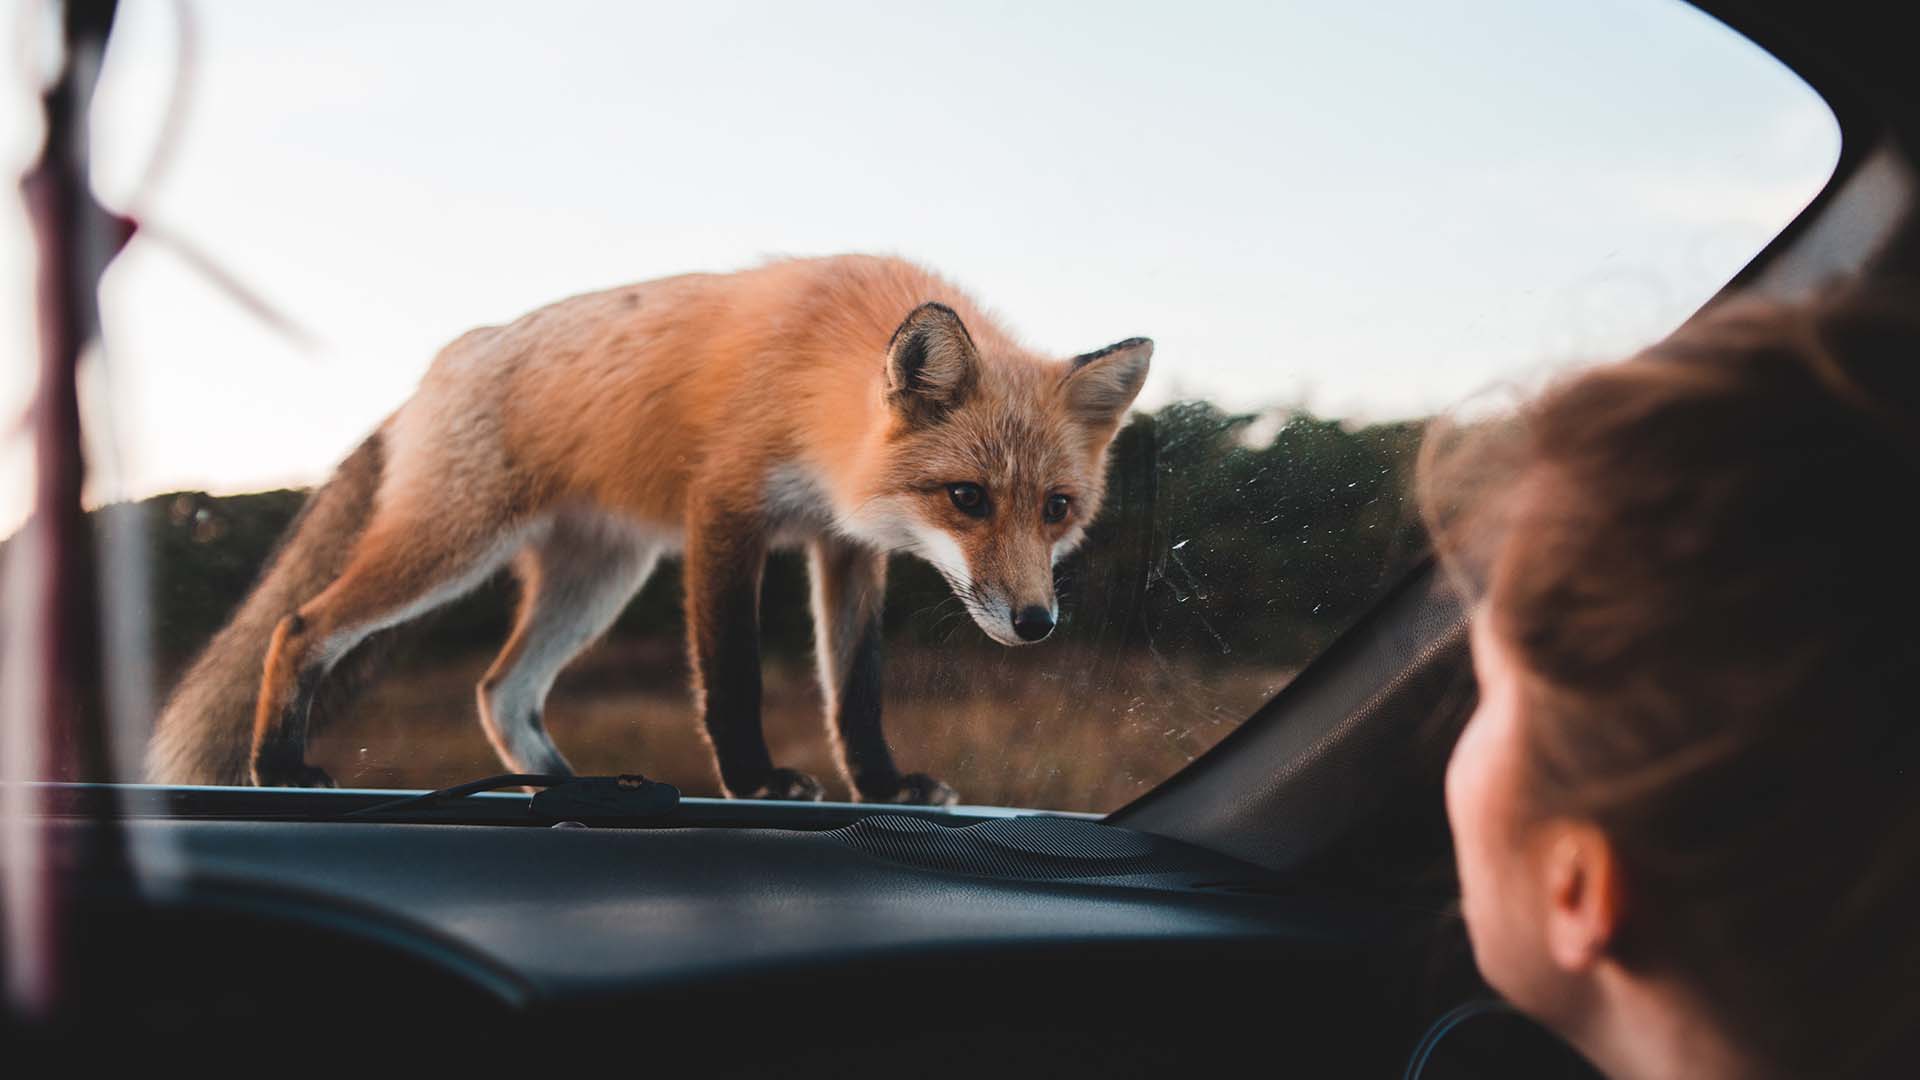 Red fox on car windshield looking in